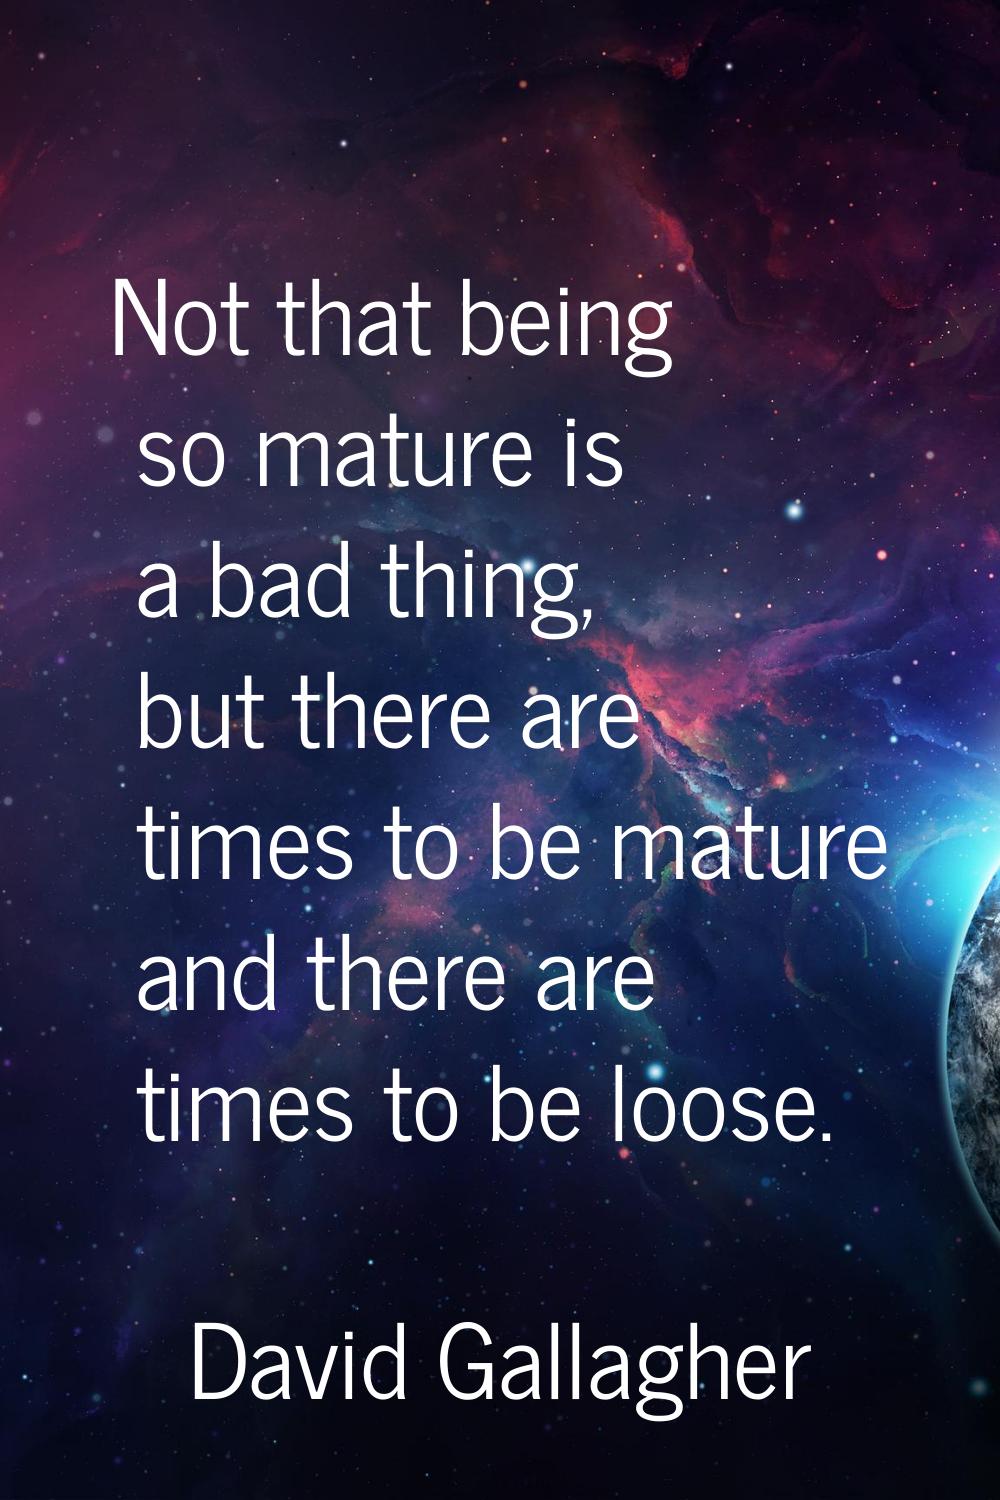 Not that being so mature is a bad thing, but there are times to be mature and there are times to be